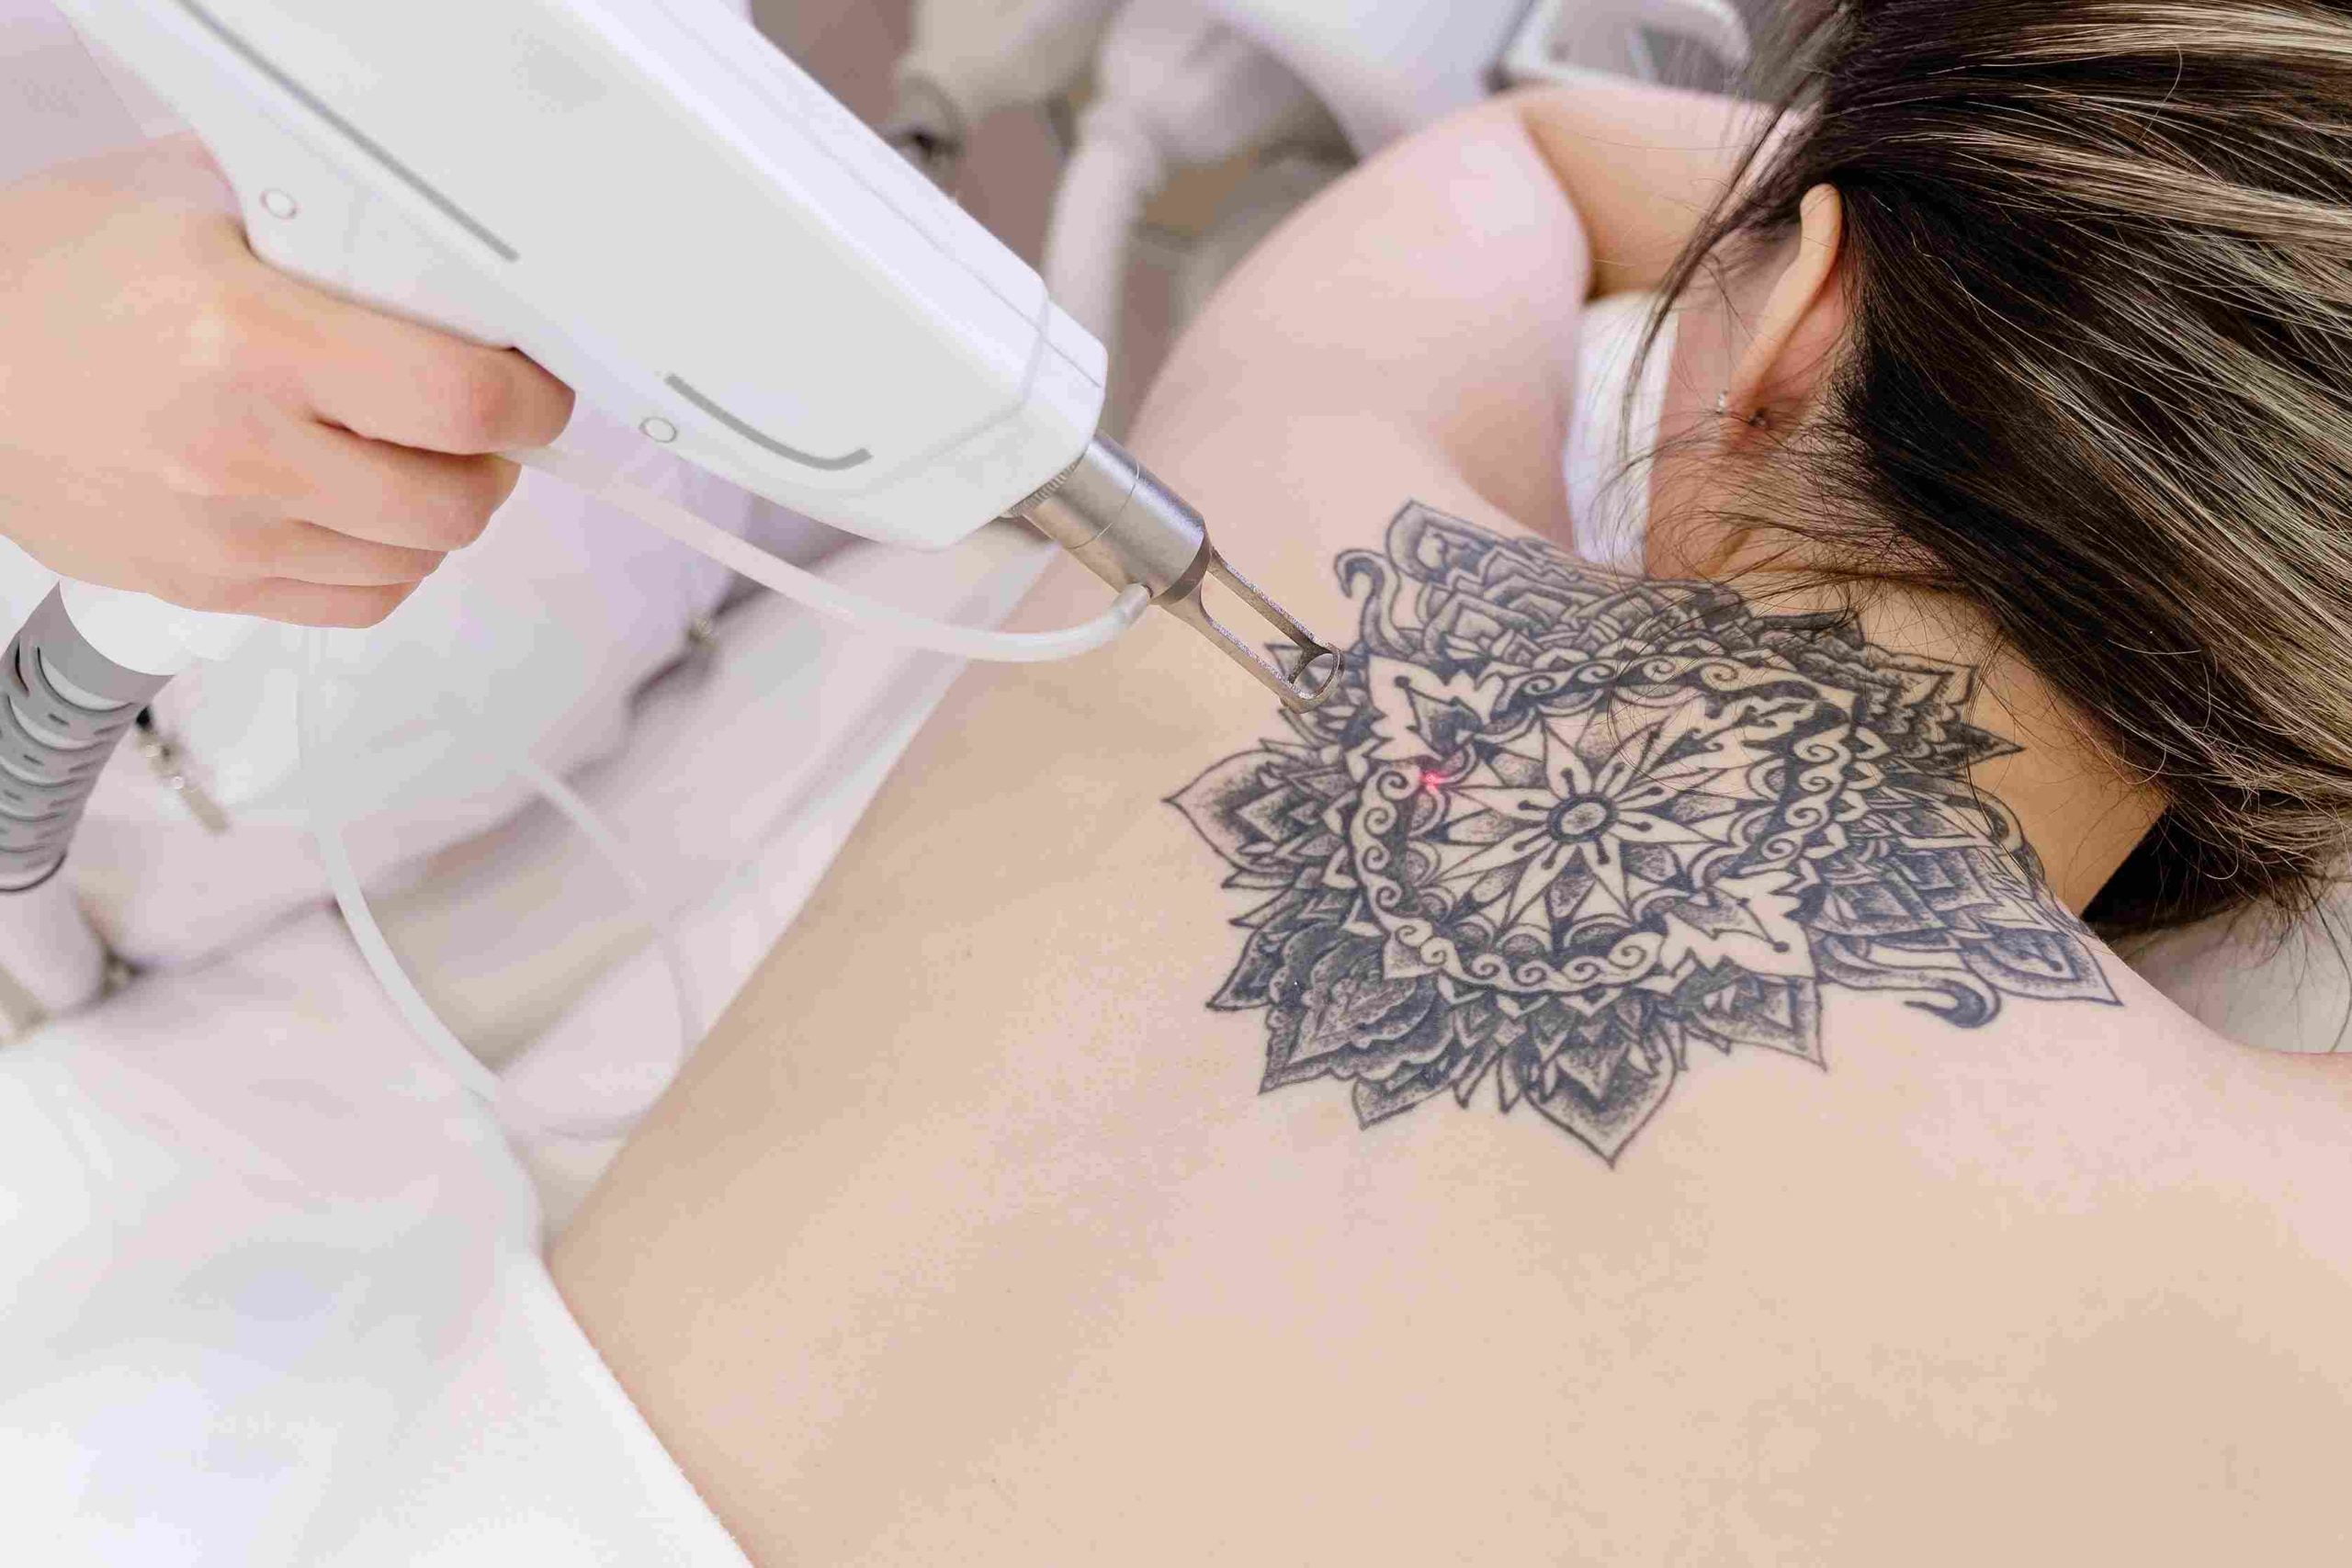 Woman Receiving Pico Laser Tattoo Removal Treatment on her Back | Avail Aesthetics in Wake Forest, NC